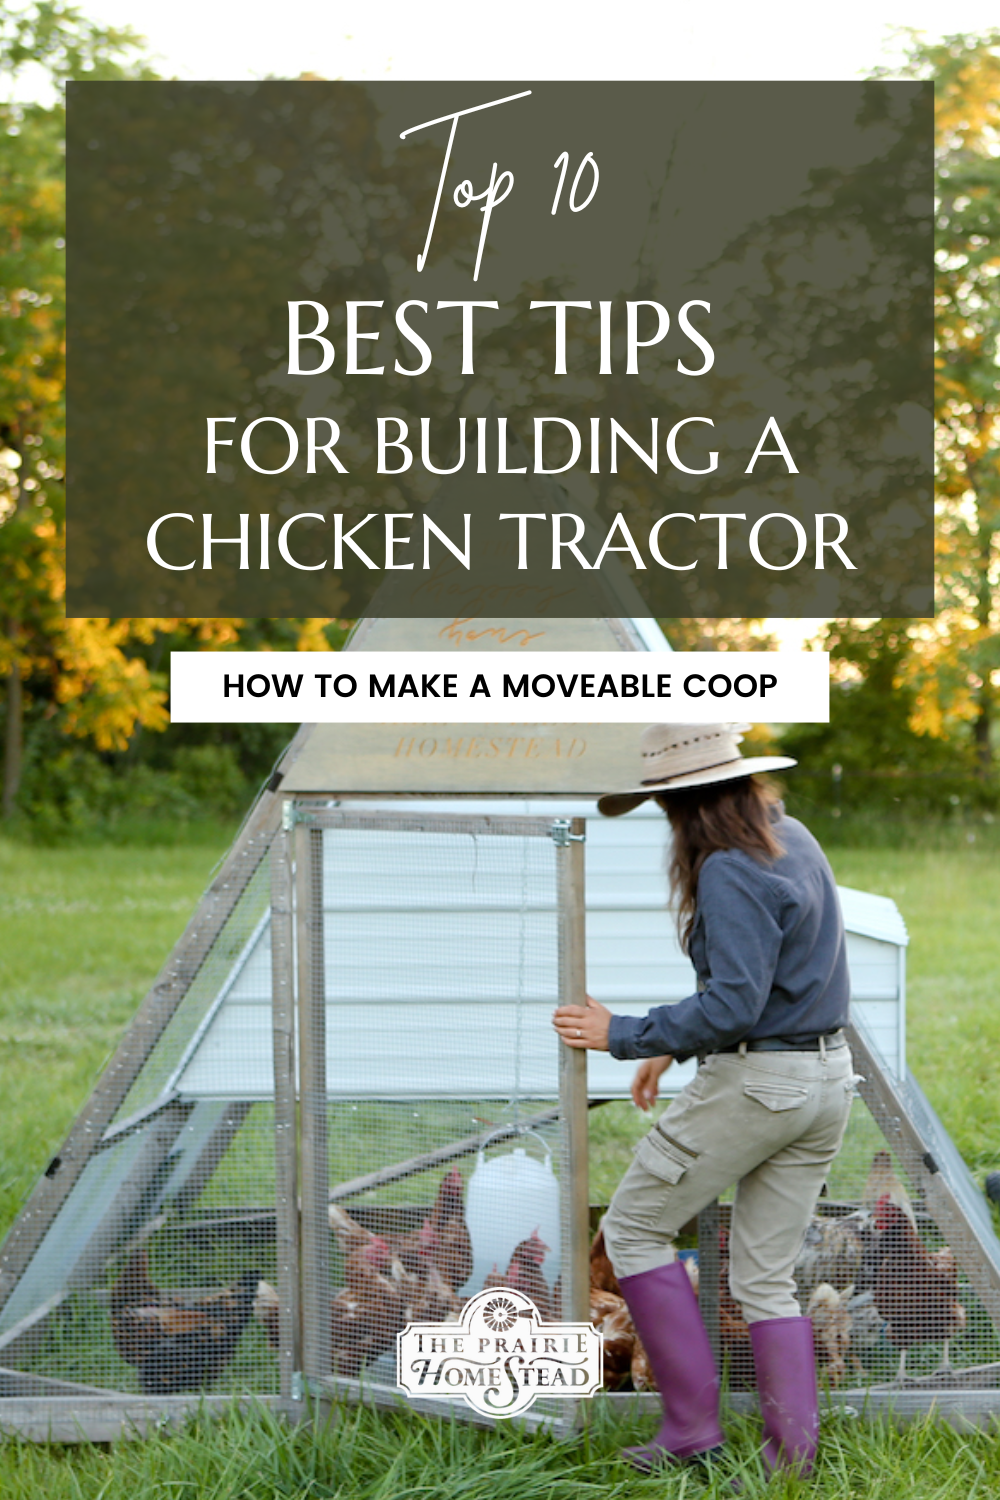 Top 10 Tips for Building a Chicken Tractor